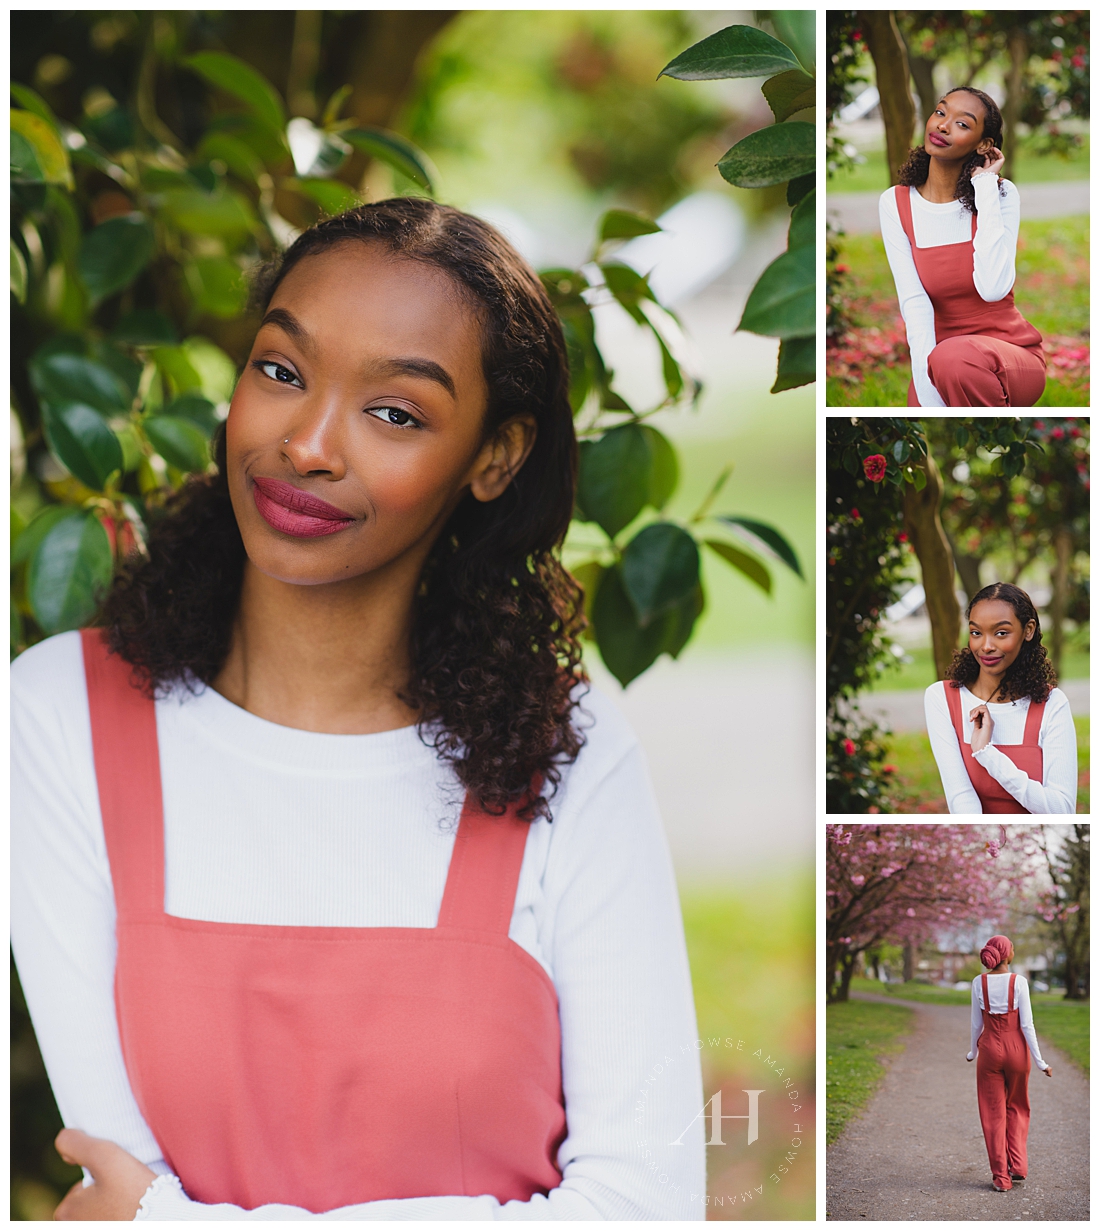 Wright Park Senior Portraits with Outfit Inspo | Pink Overalls and White Tee | Photographed by Tacoma Senior Photographer Amanda Howse